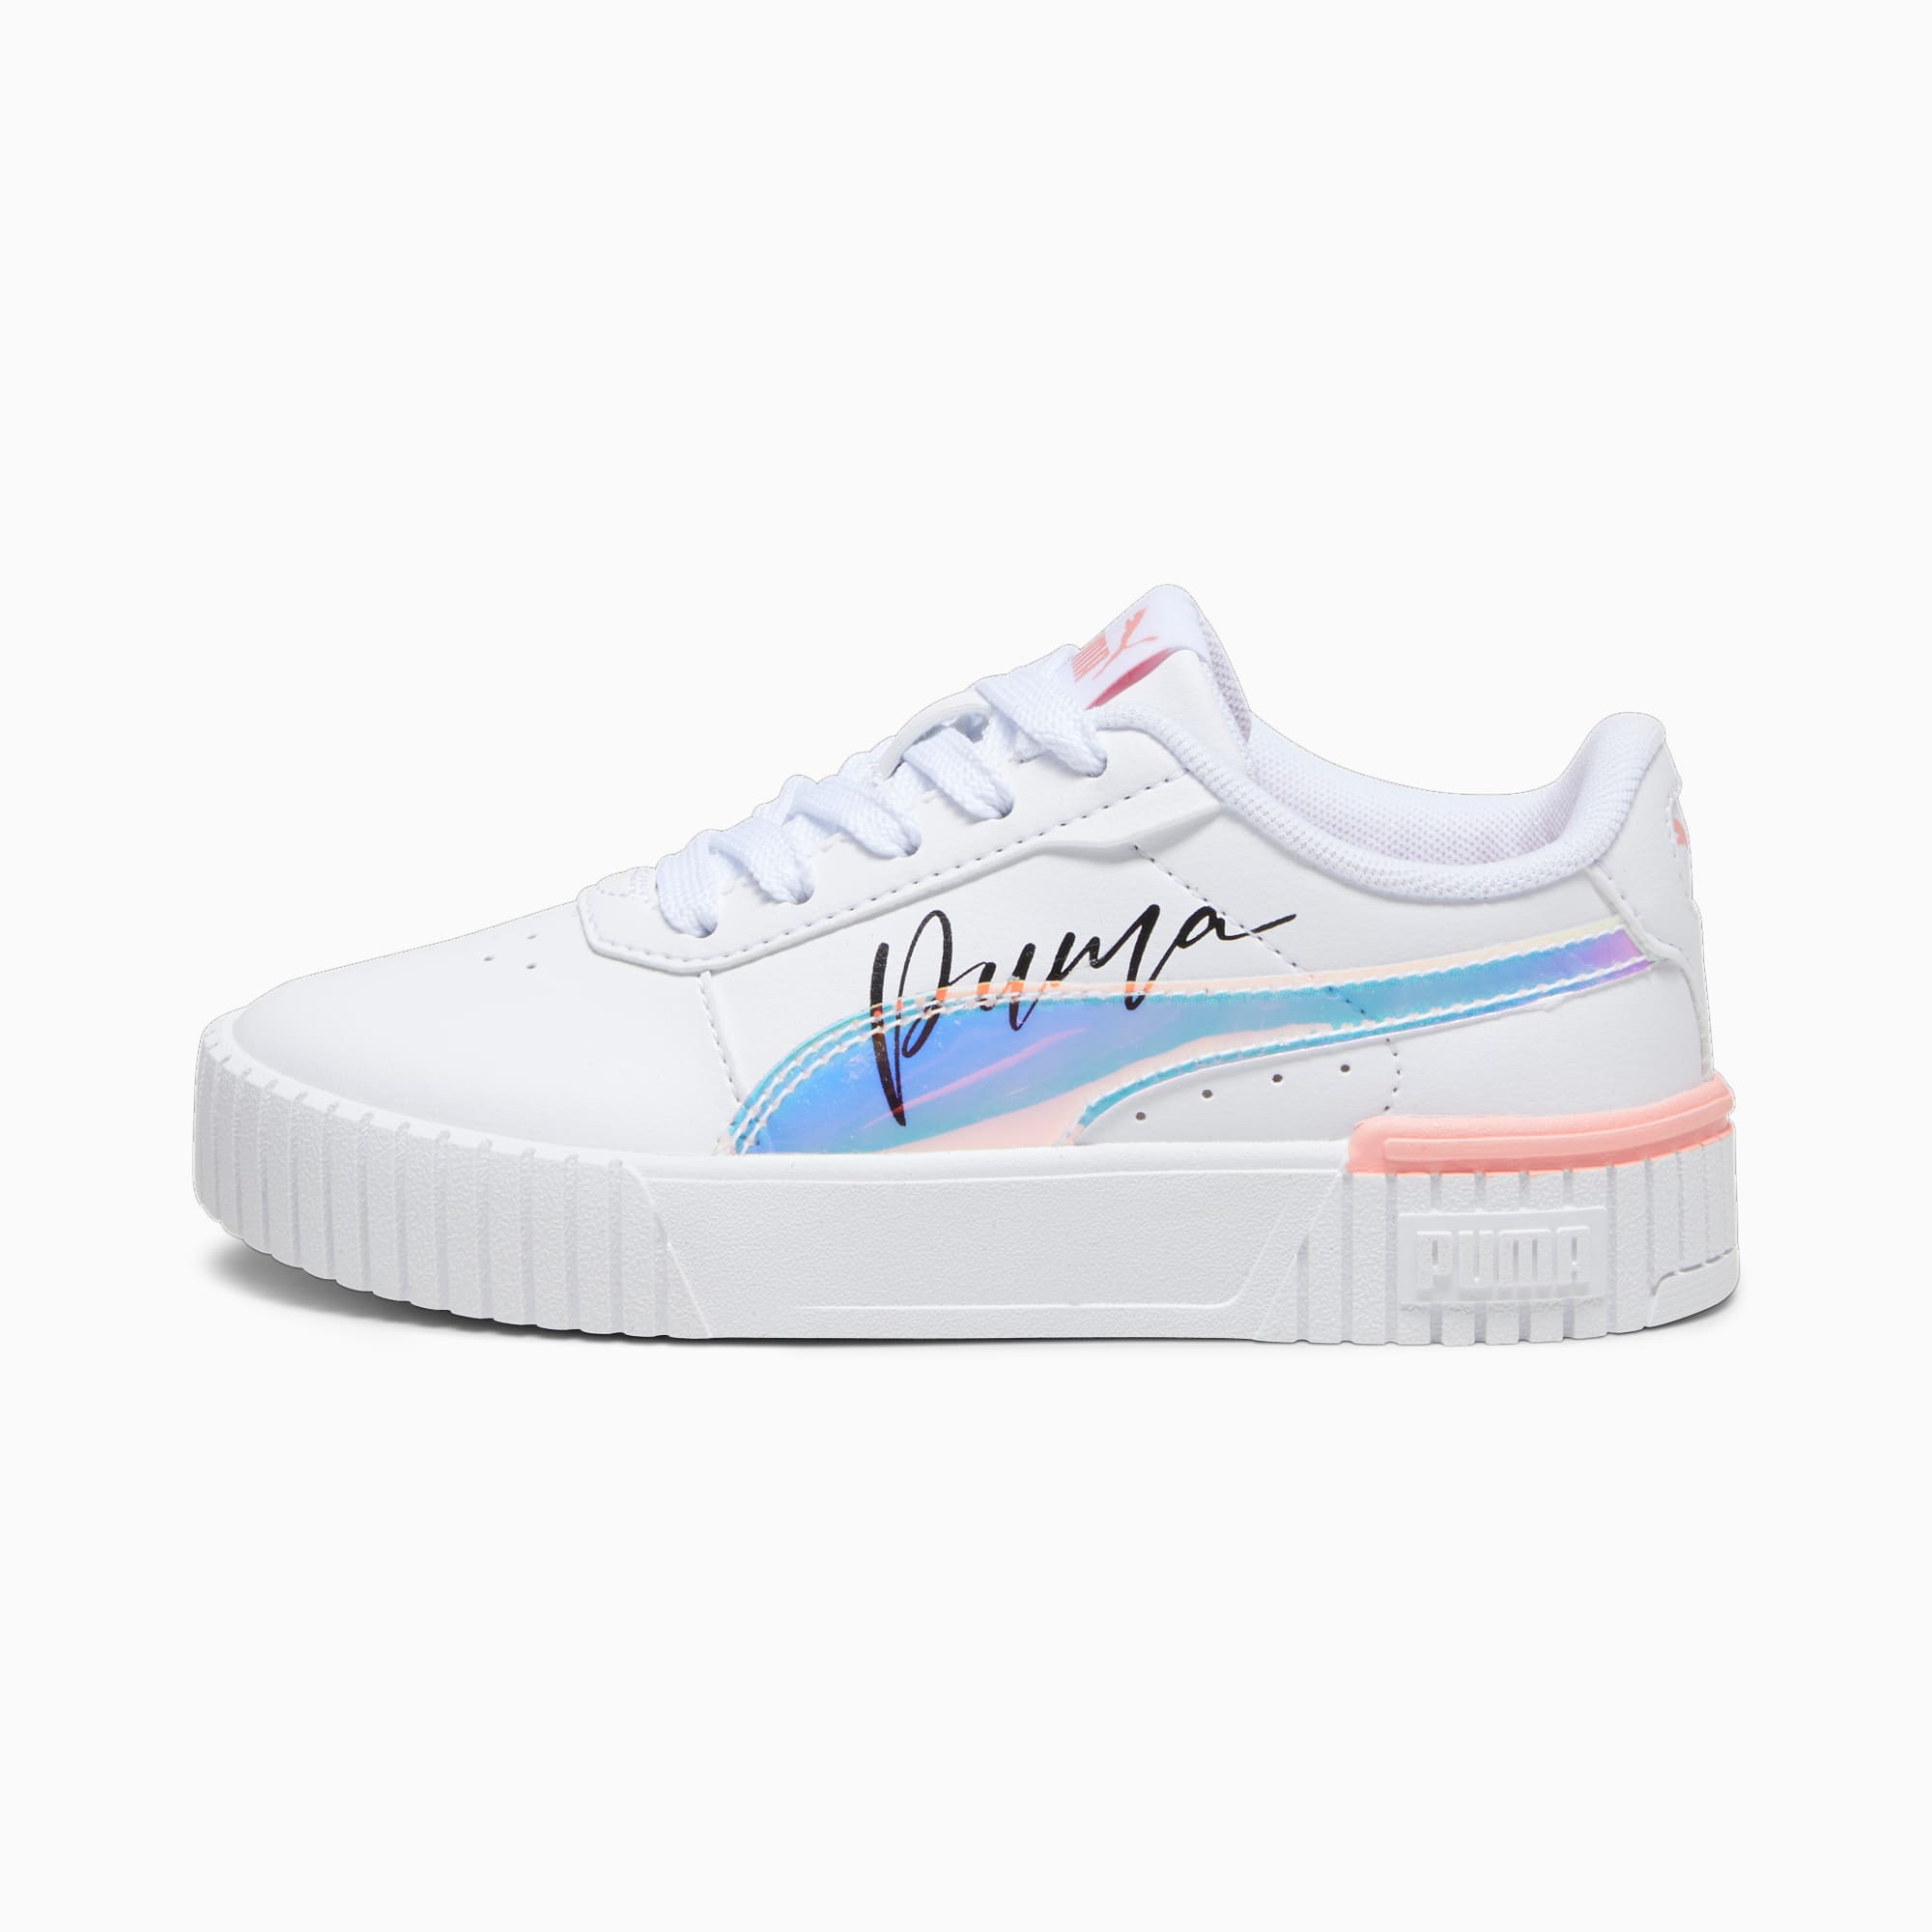 PUMA Carina 2.0 Crystal Wing Kids' Sneakers, White/Peach Smoothie/Black, Size 27,5, Shoes